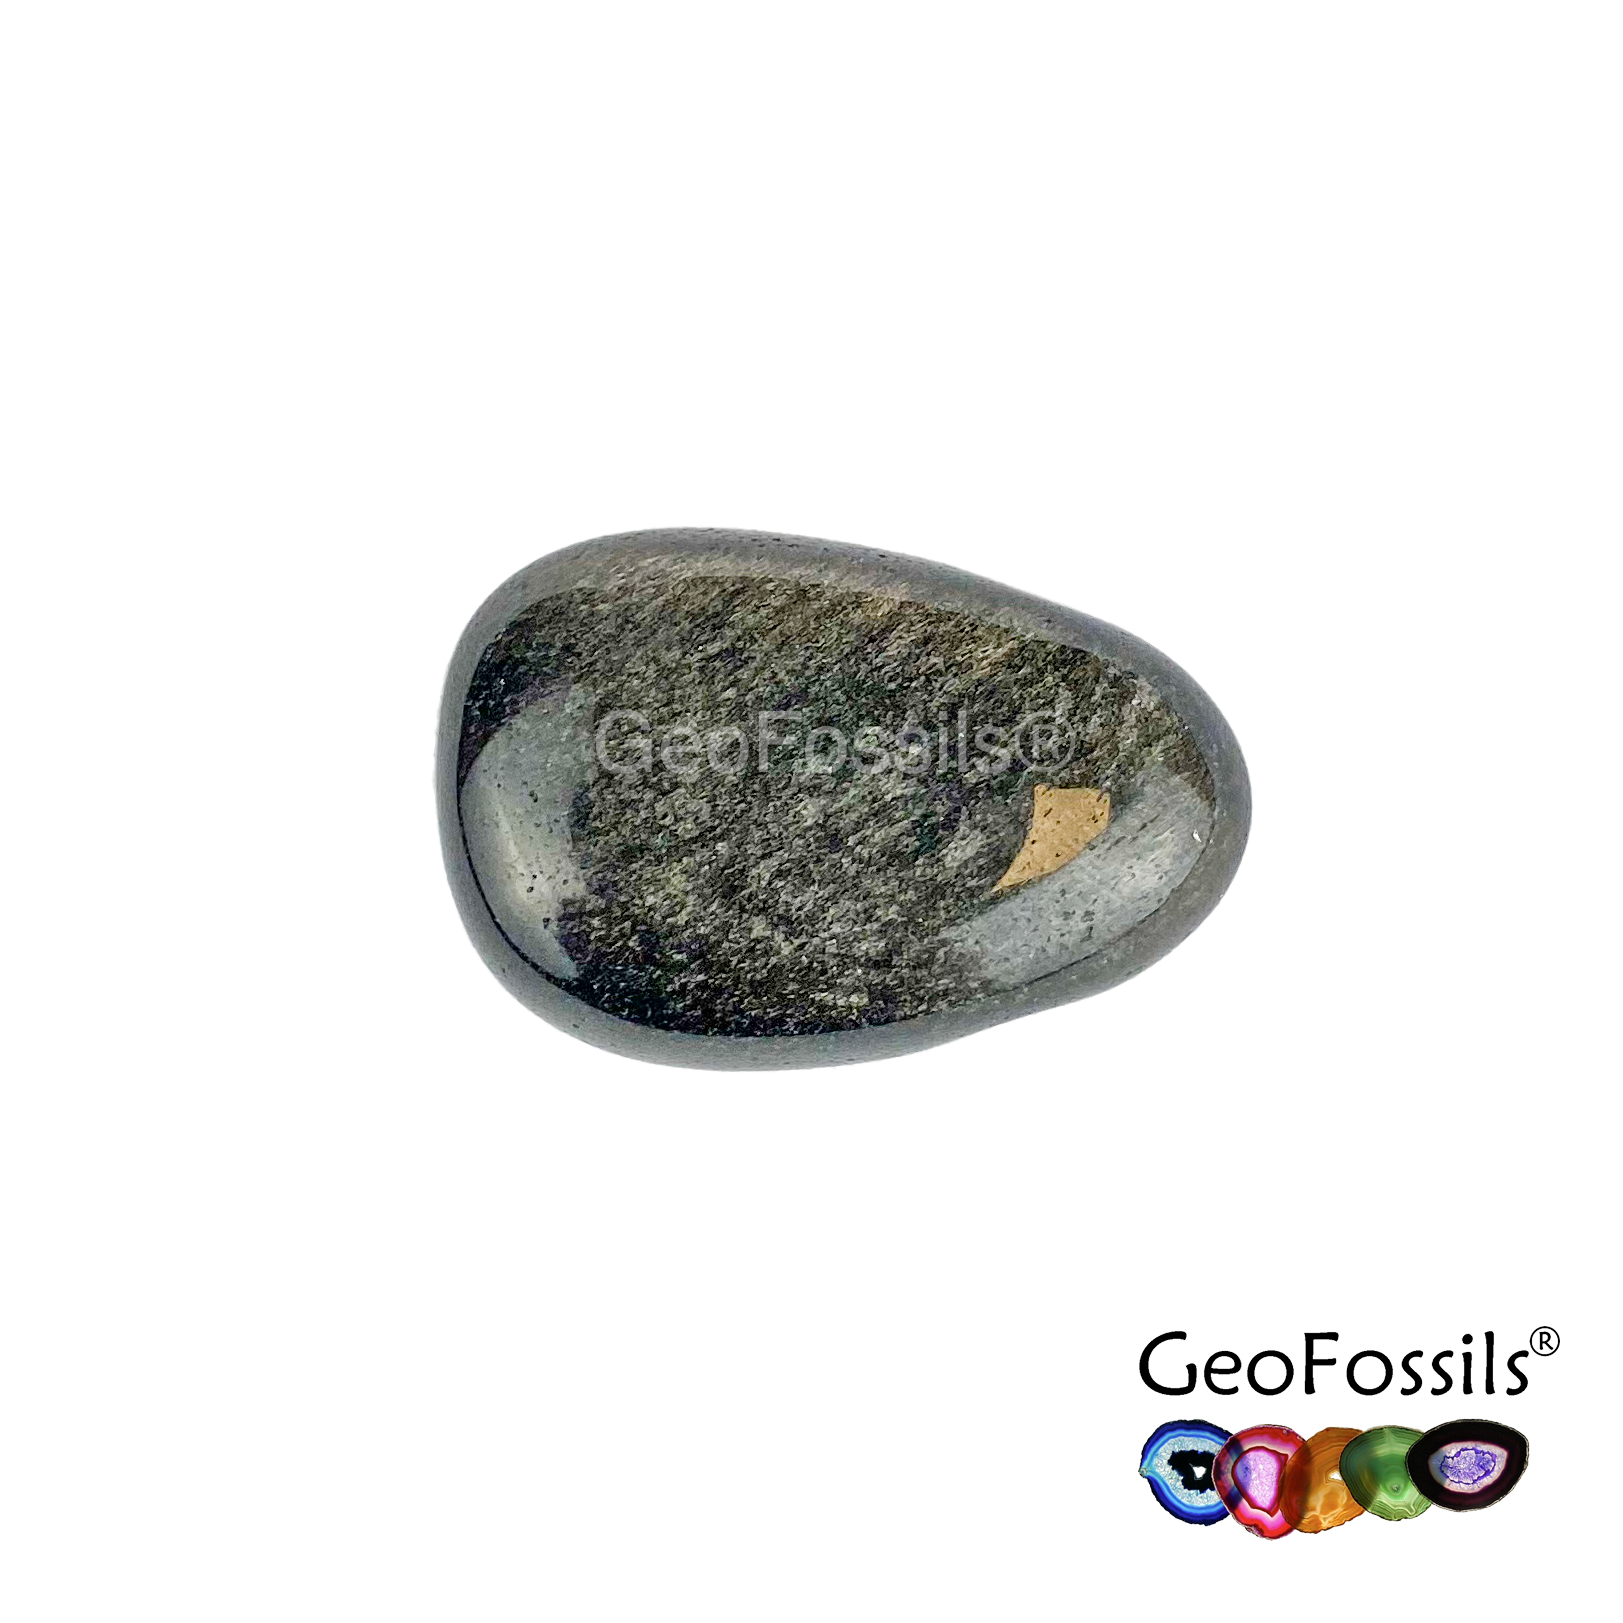 Geofossils Obsidian - Silver Sheen Drilled Tumble Stone